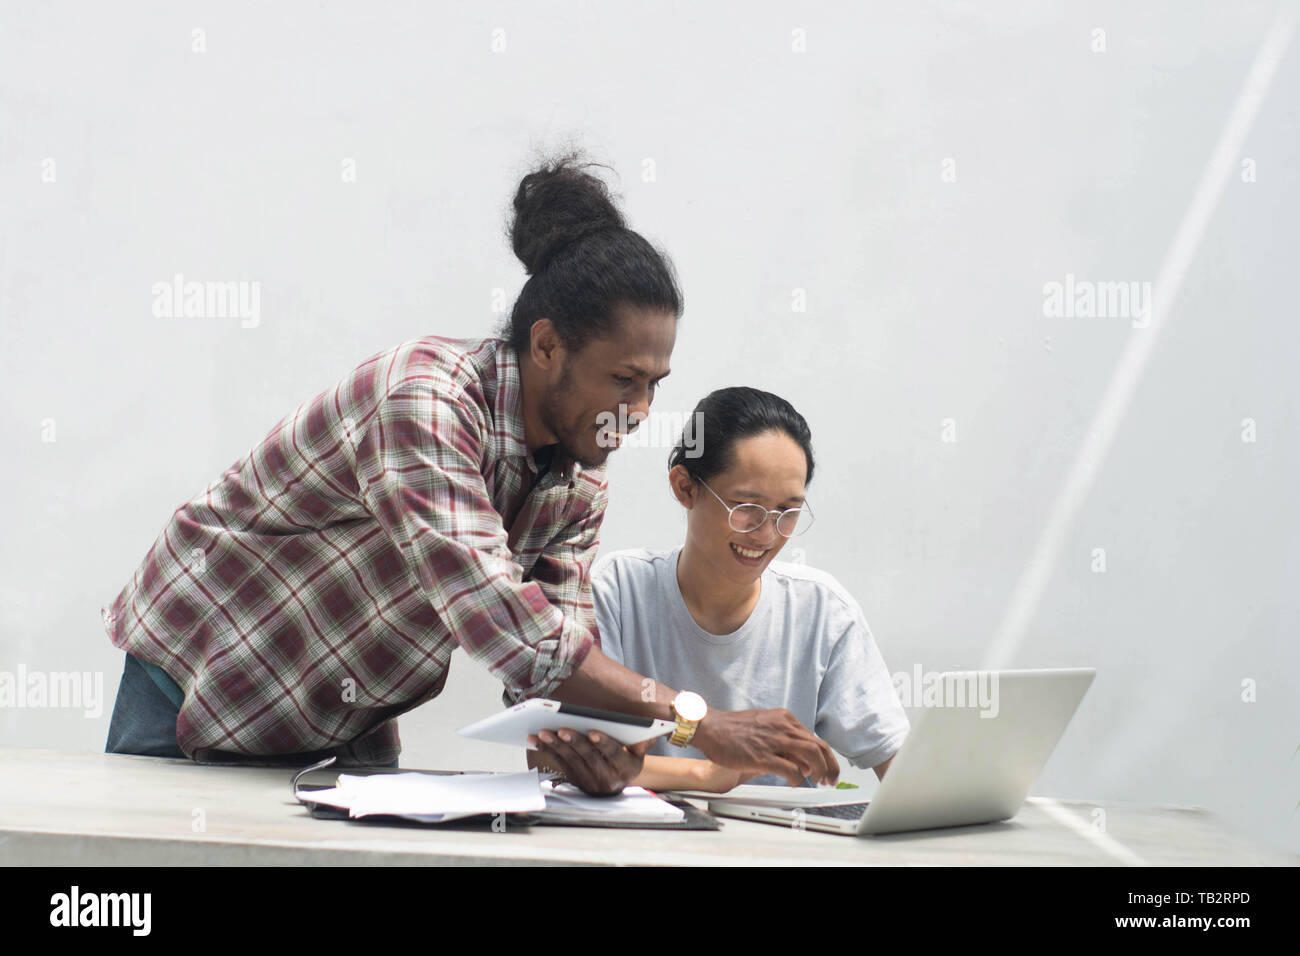 two friend with diffrent ethnic working together with laptop and tablet discussing something, two young man working and studying together Stock Photo